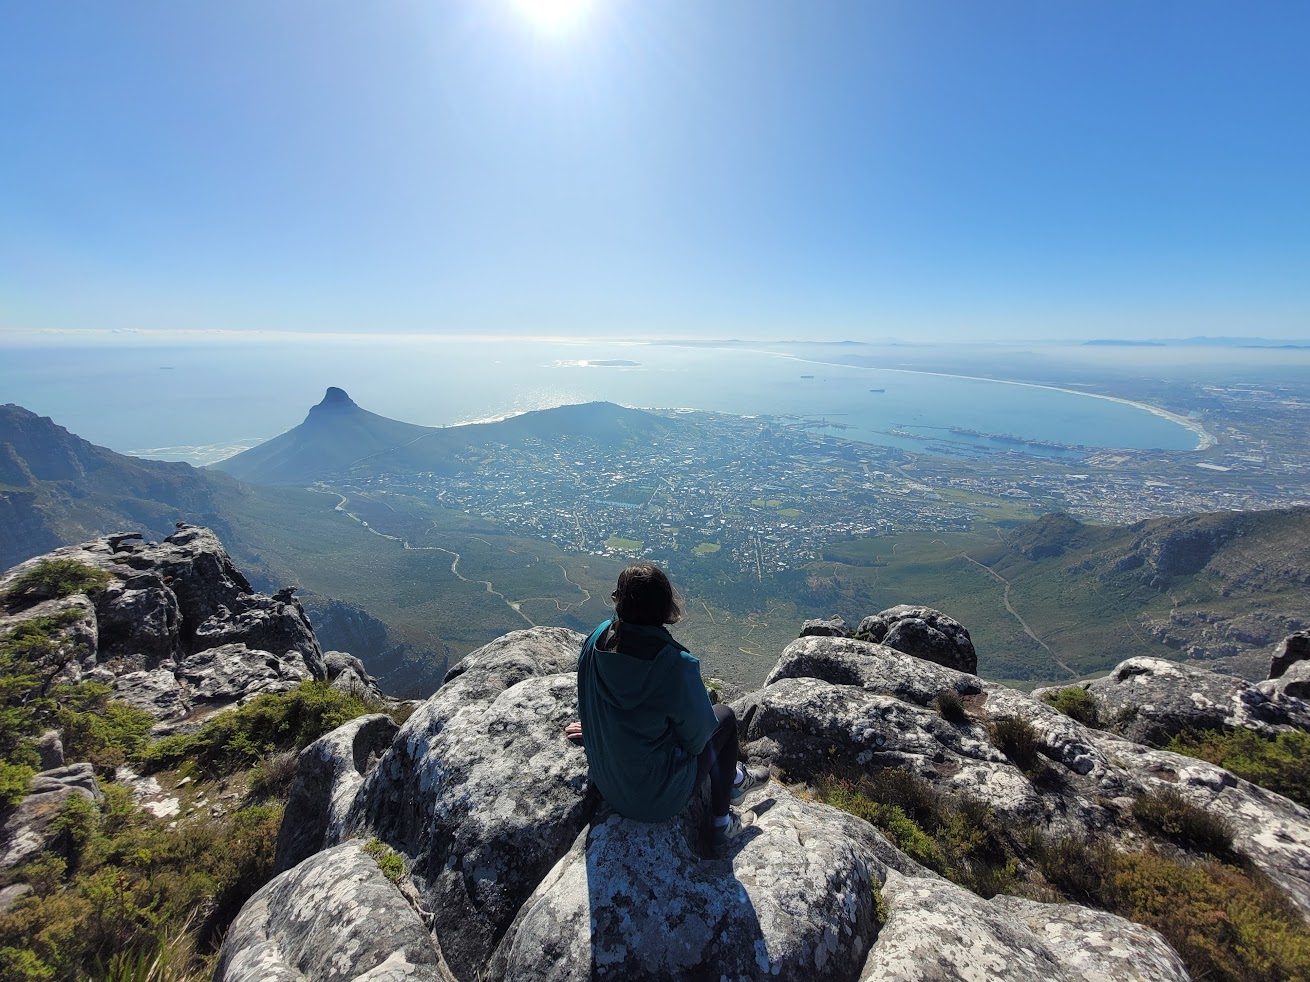 Looking over Cape Town from famous Table Mountain.